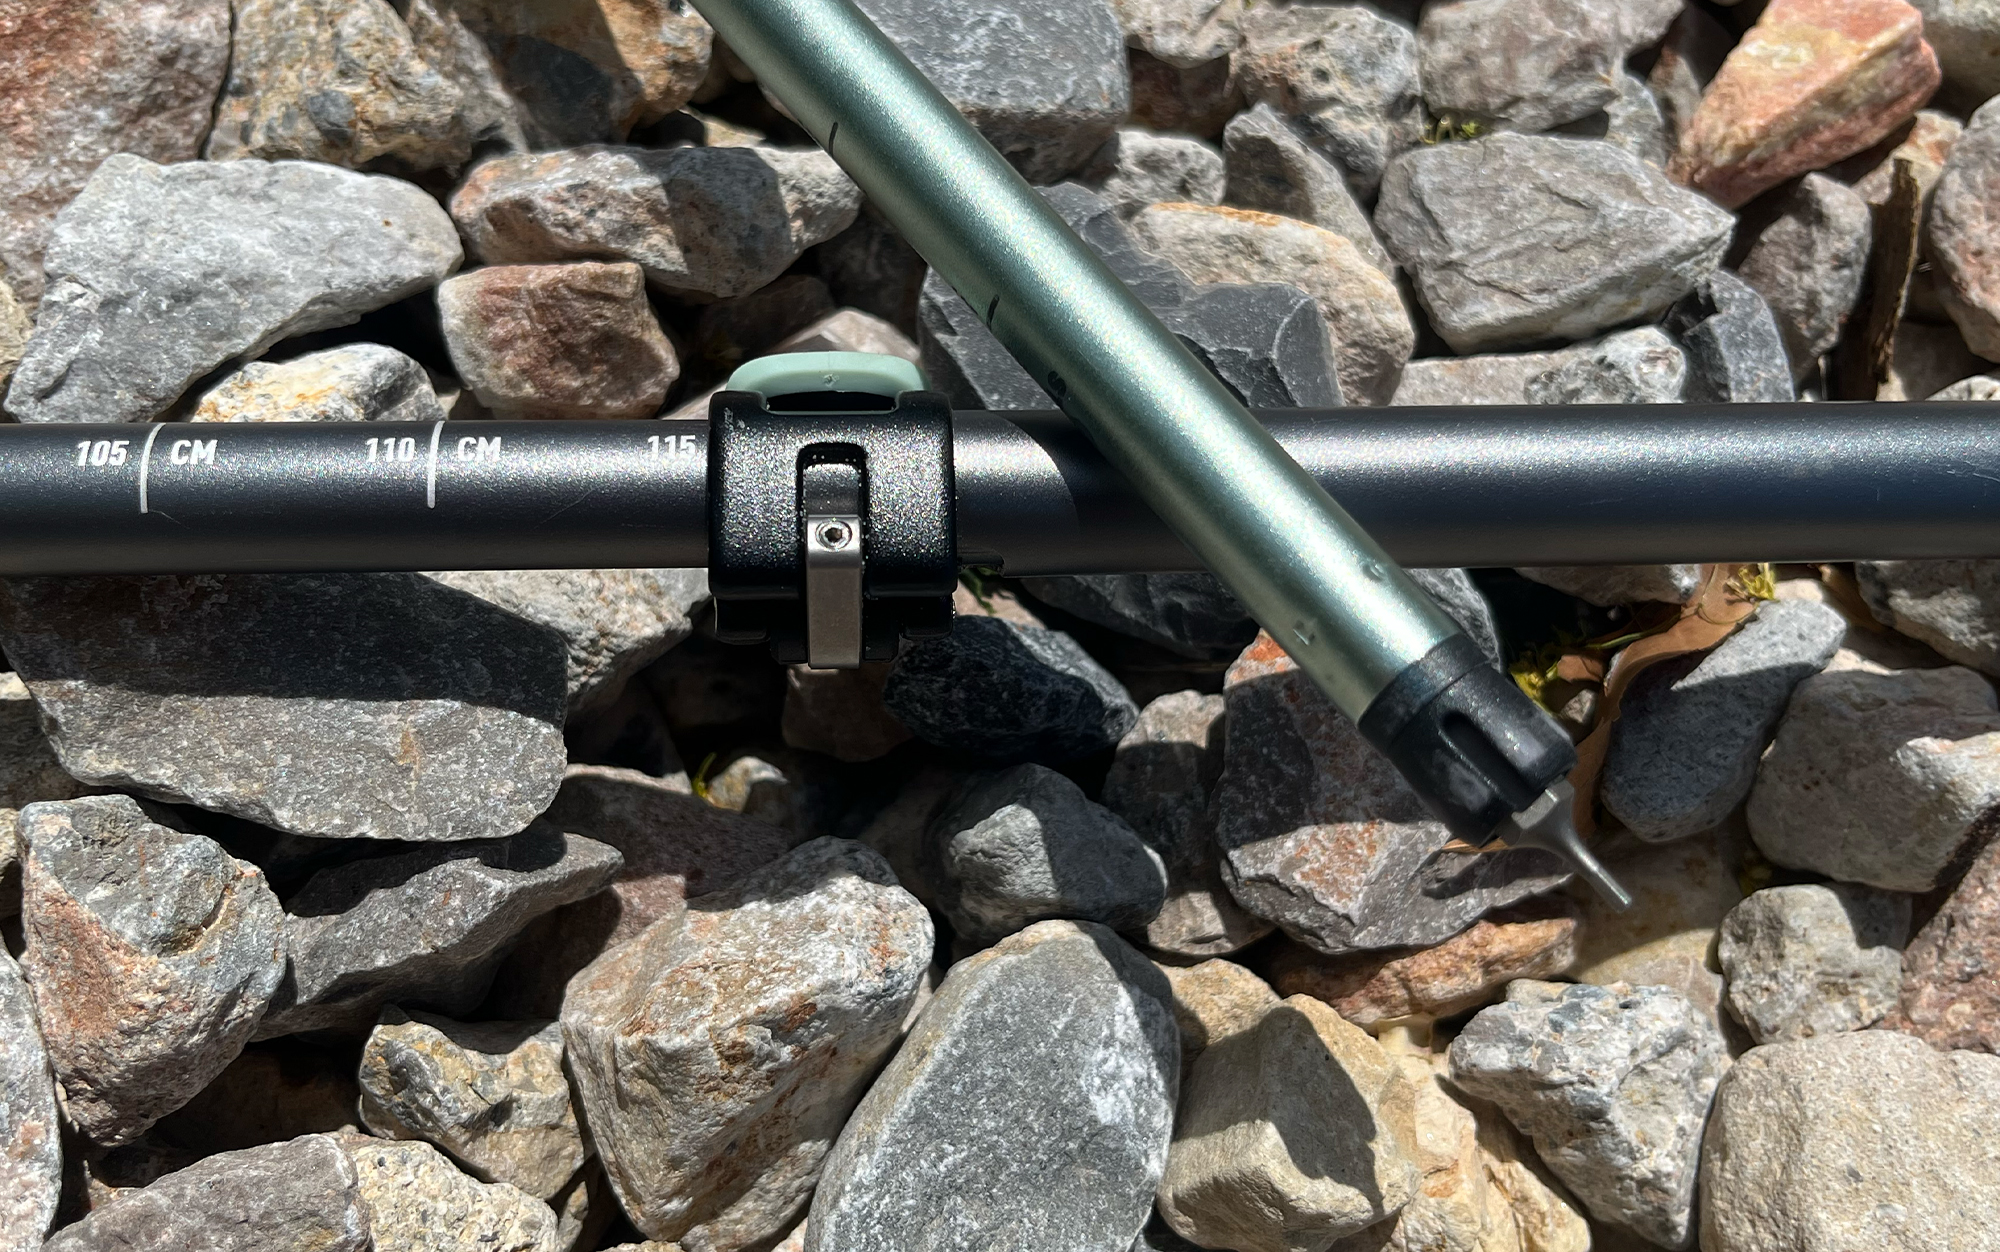 One of the Black Diamond Pursuit Shock poles contains a hex tool in the lower shaft for field tightening your flip locks.